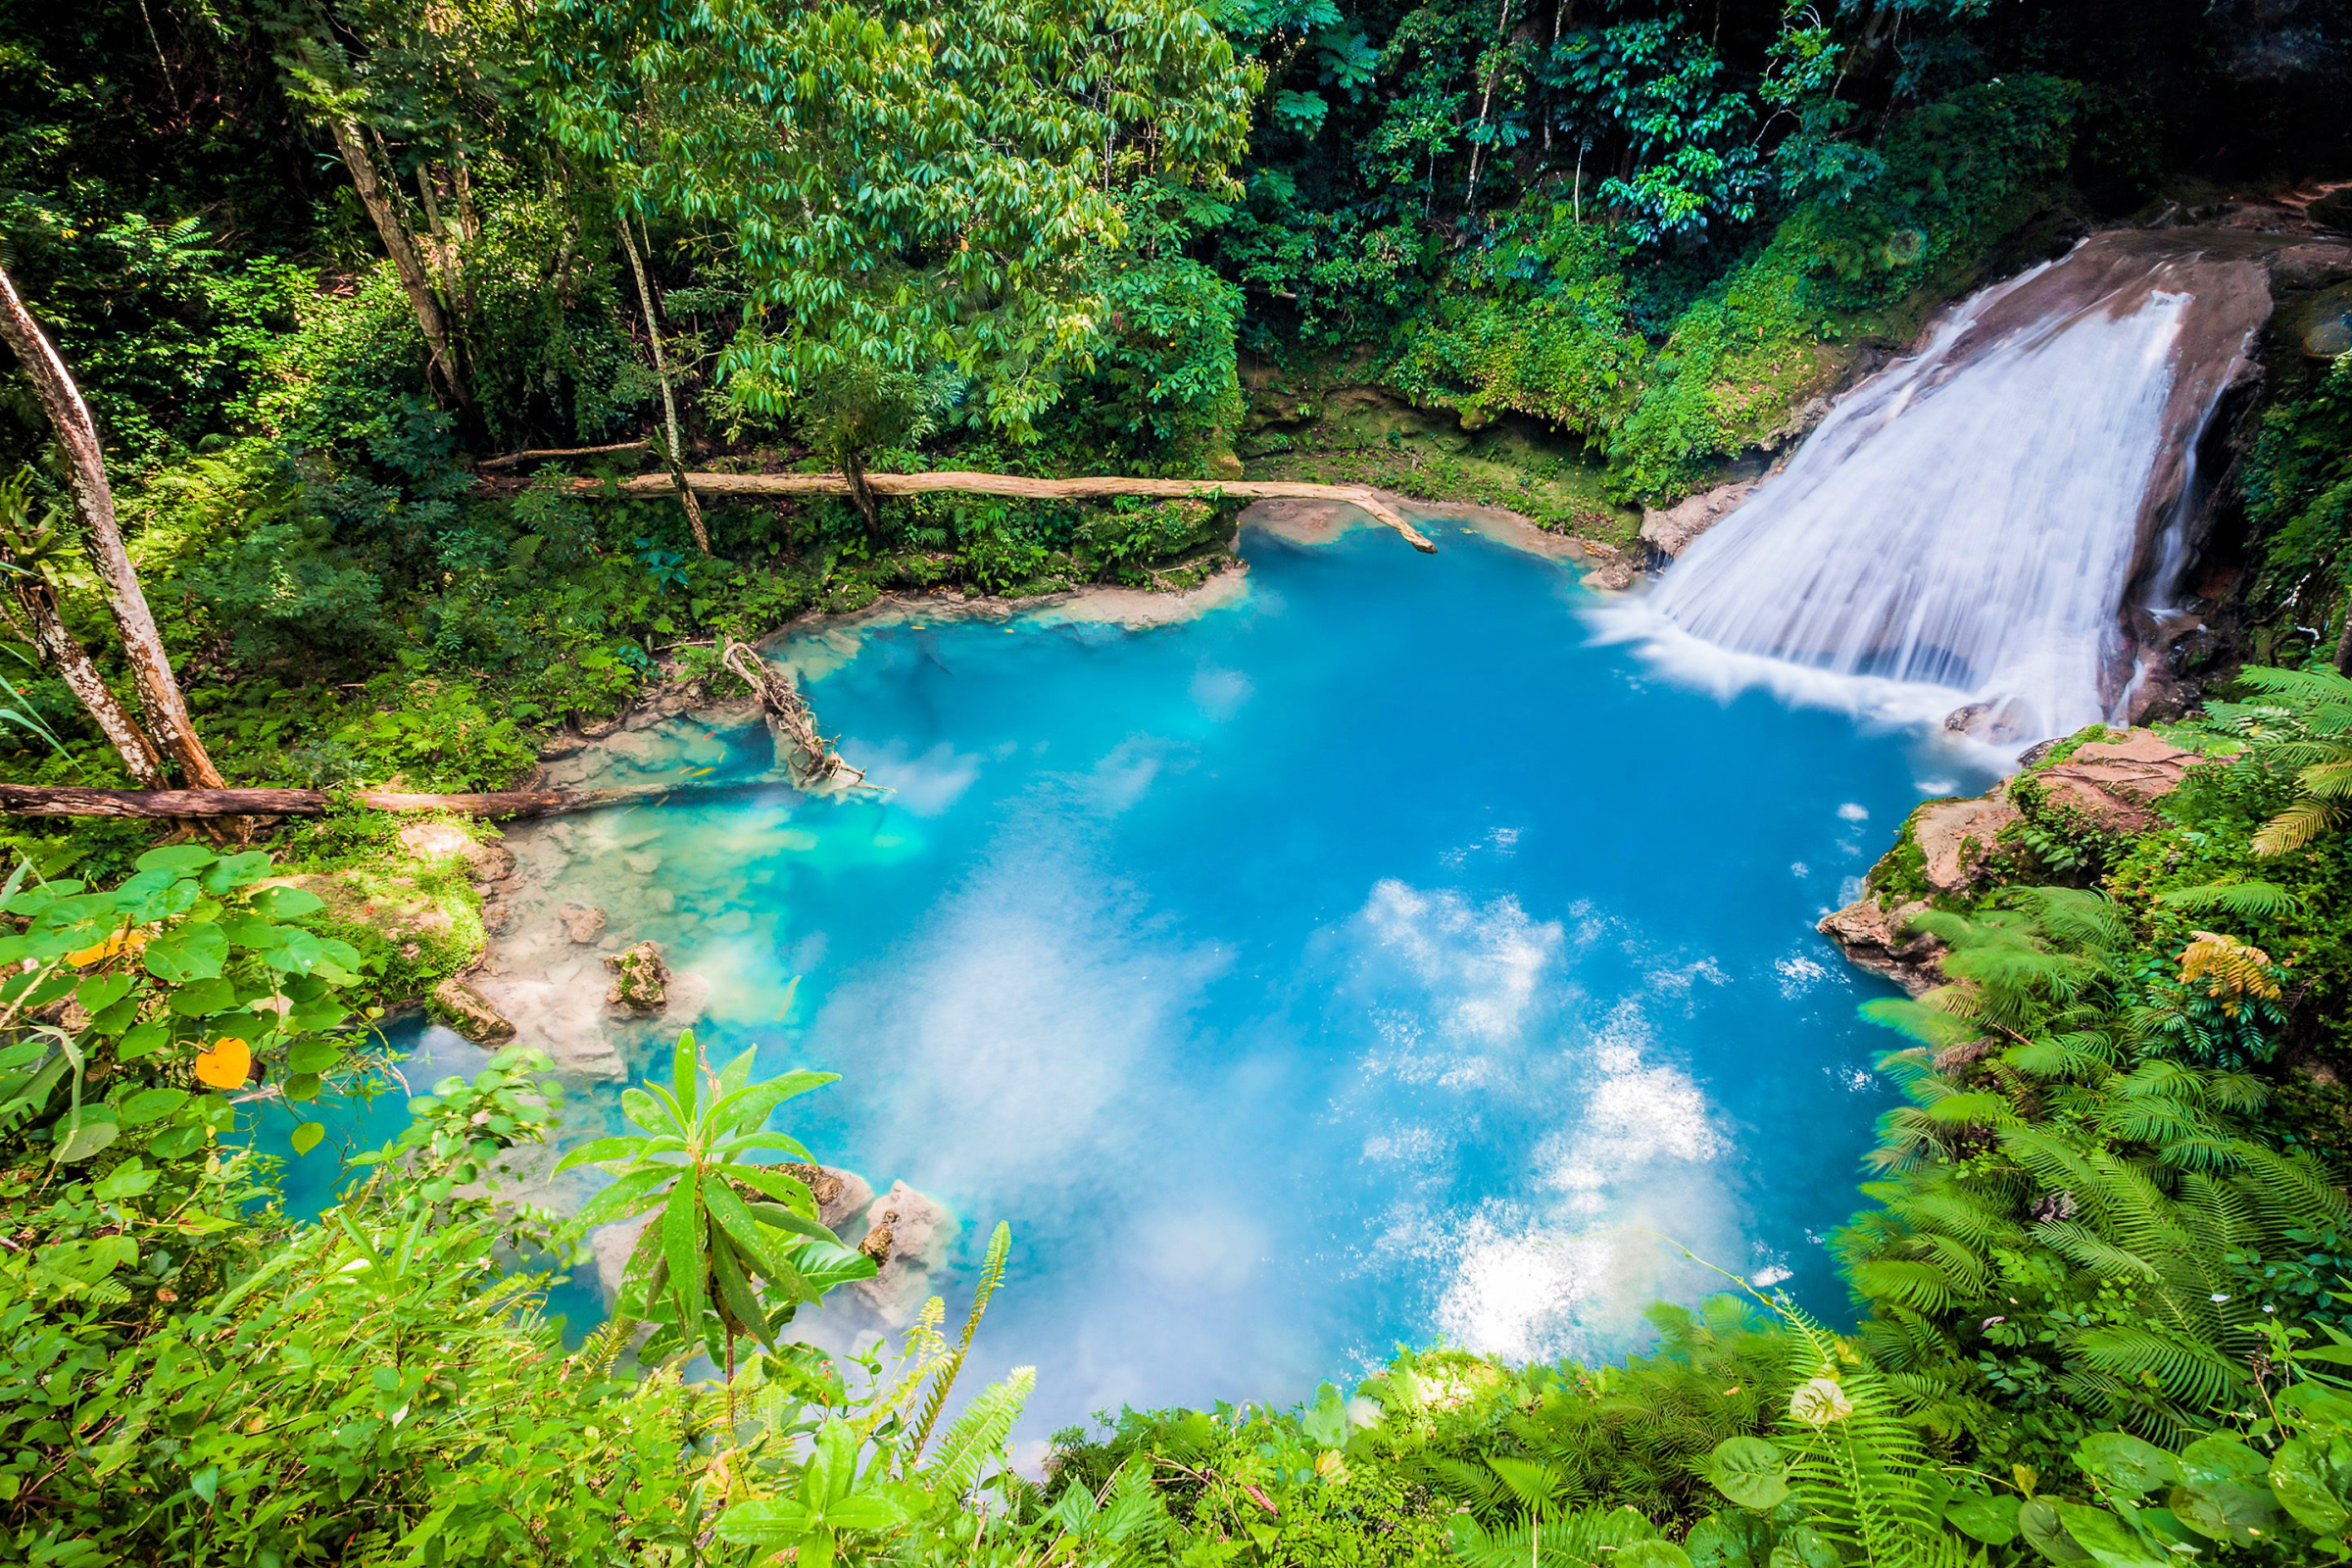 The Blue Hole – A Nature Lover’s Paradise